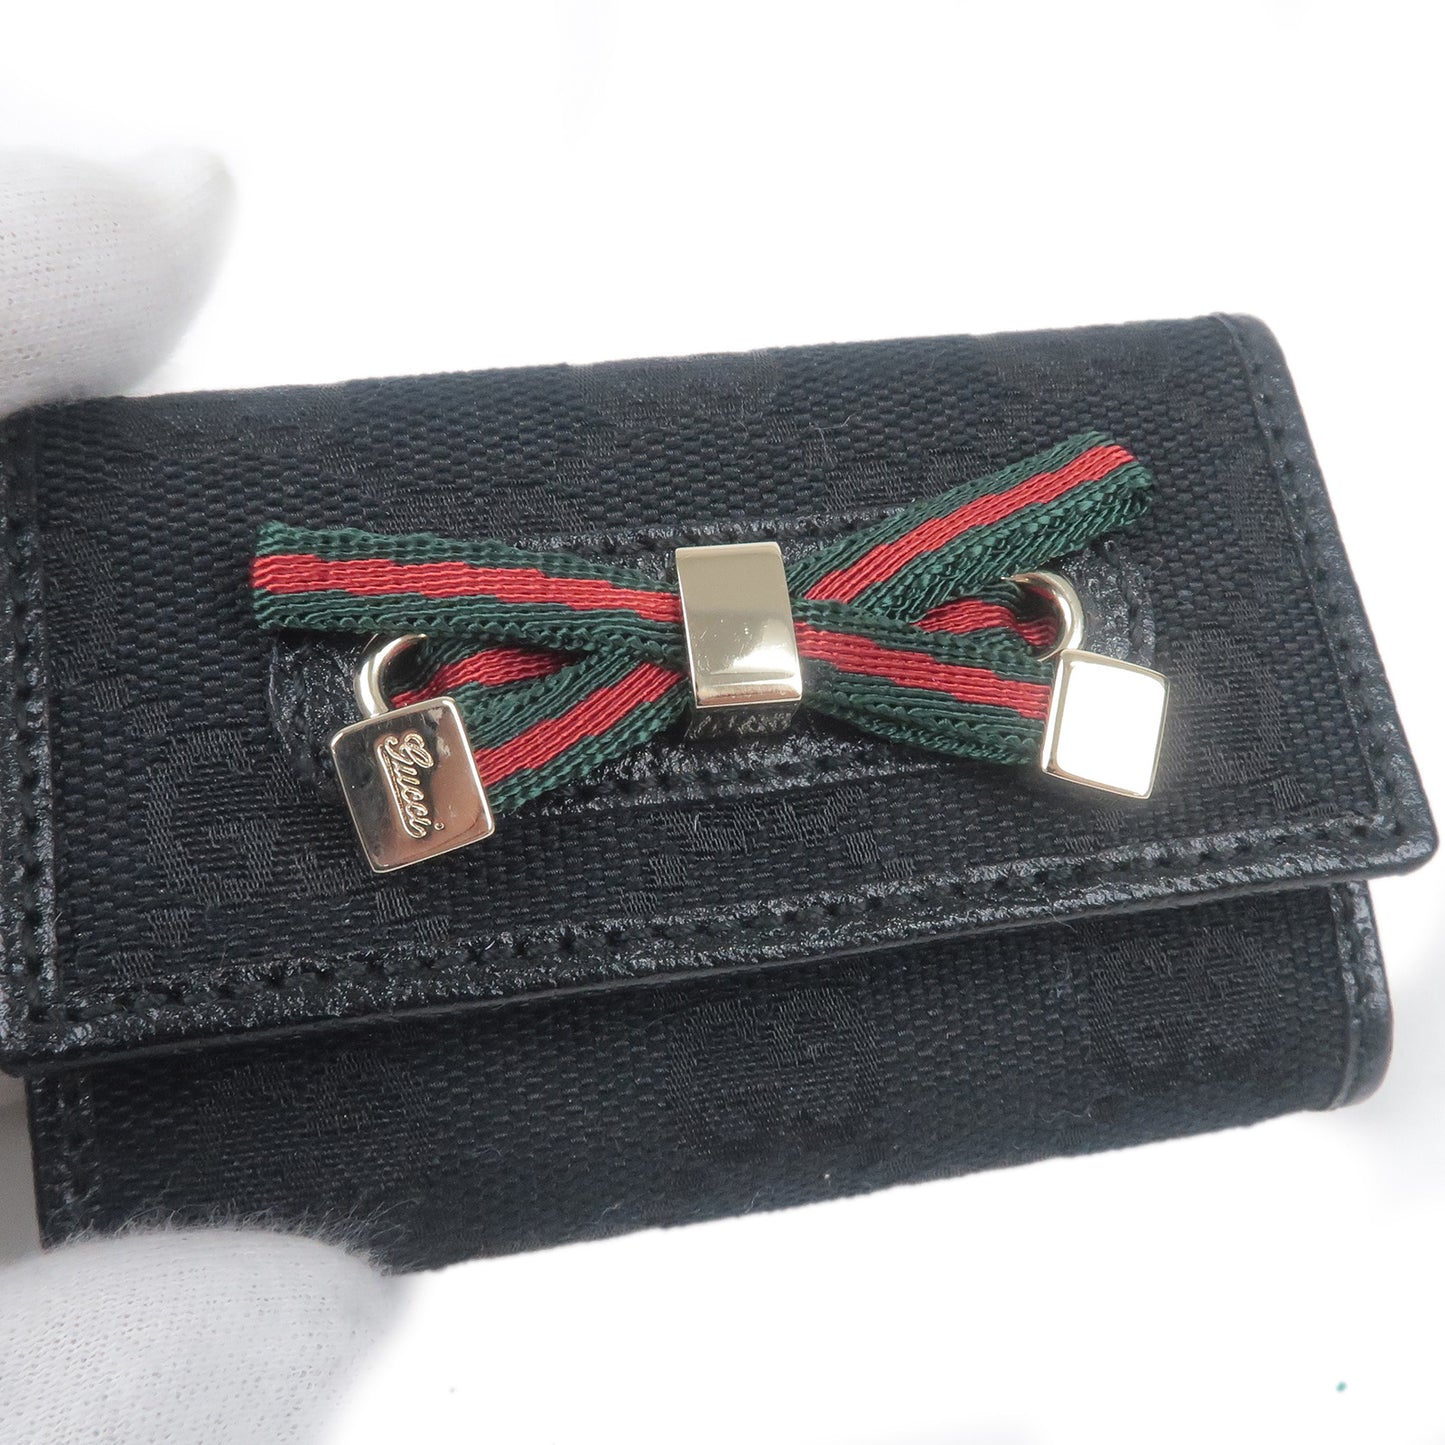 GUCCI Sherry Princy GG Canvas Leather 6 Ring Key Case Black 162770